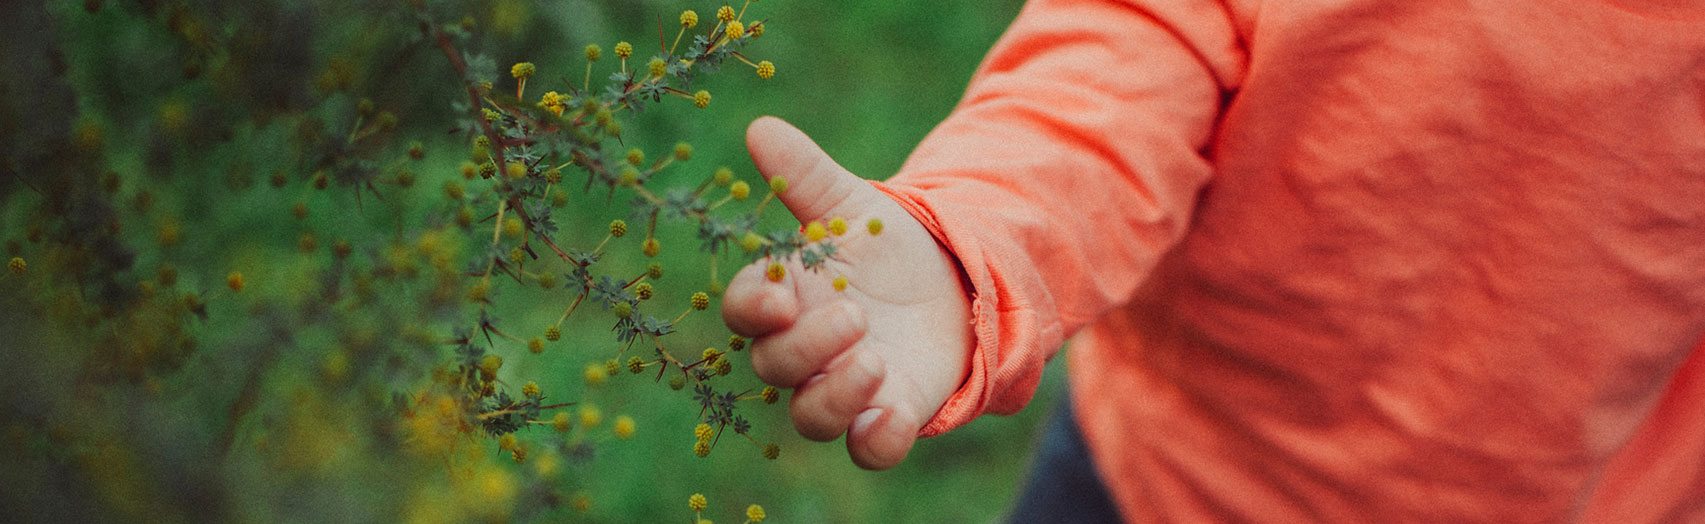 Connecting Children with Nature